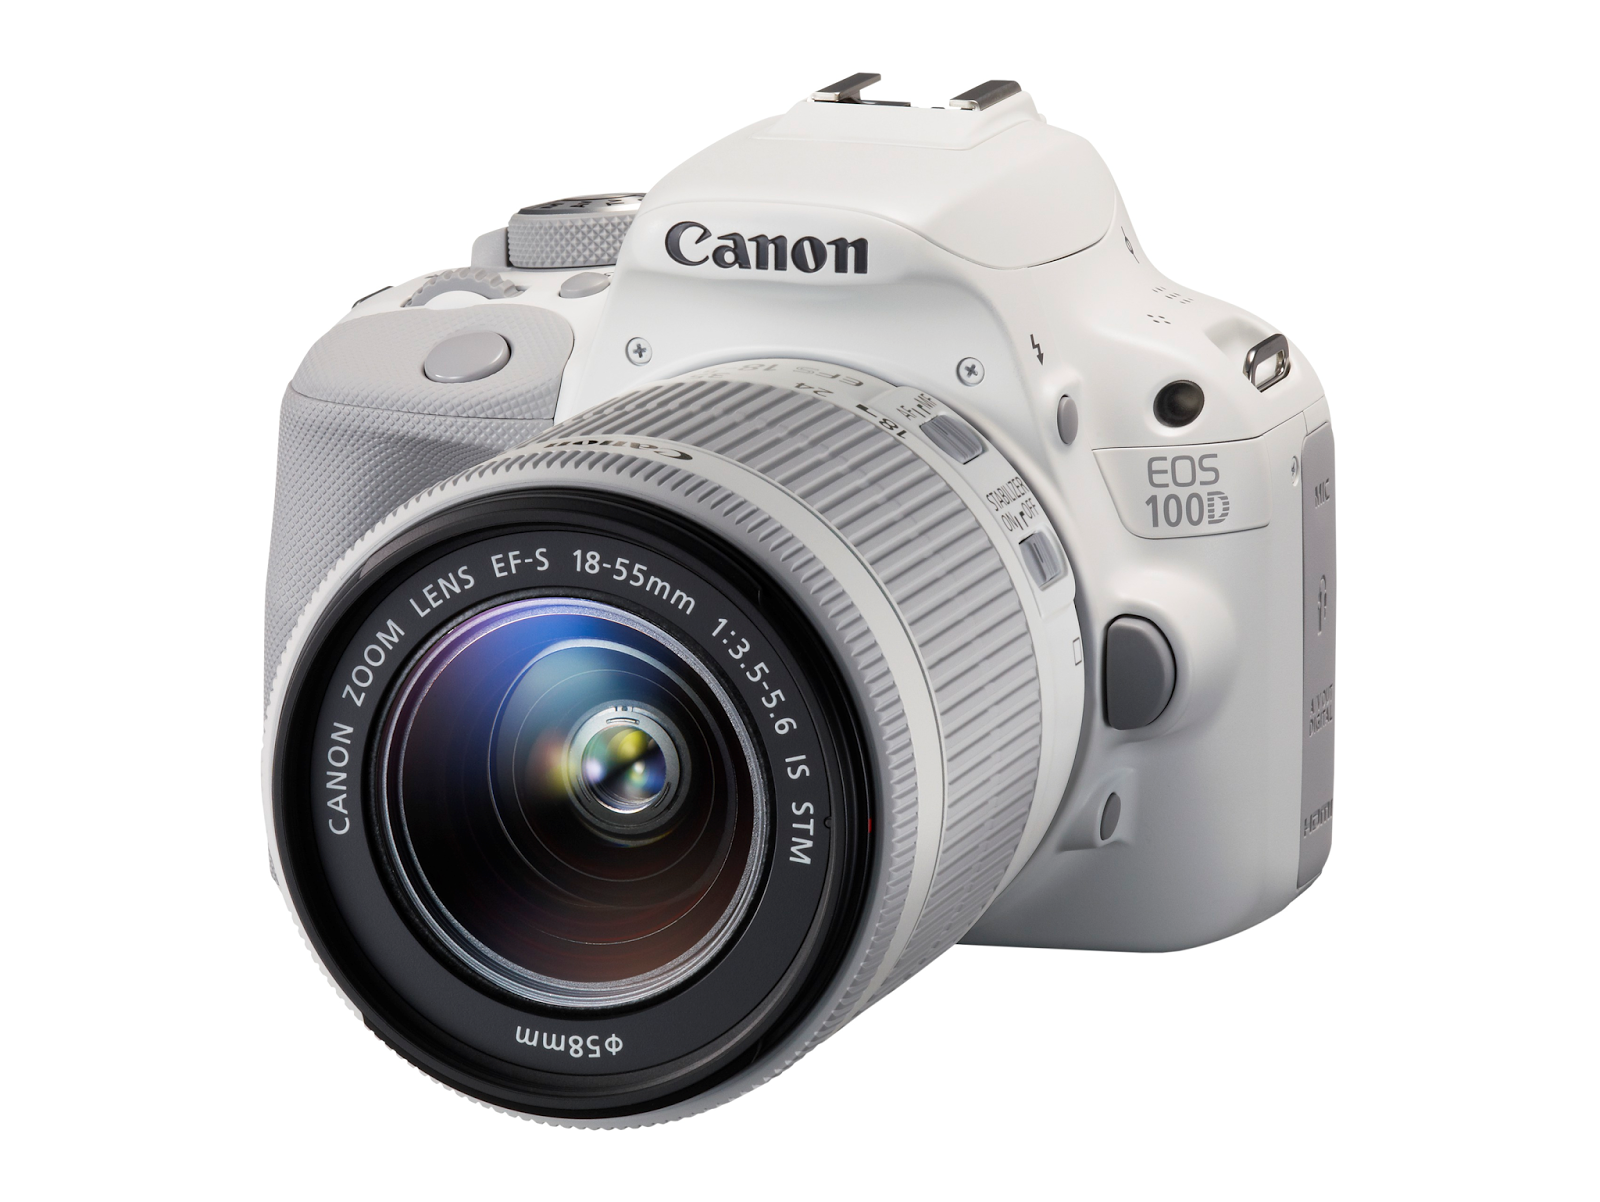 White Canon EOS Rebel SL1 Kit with EF-S 18-55mm f/3.5-5.6 IS STM Lens